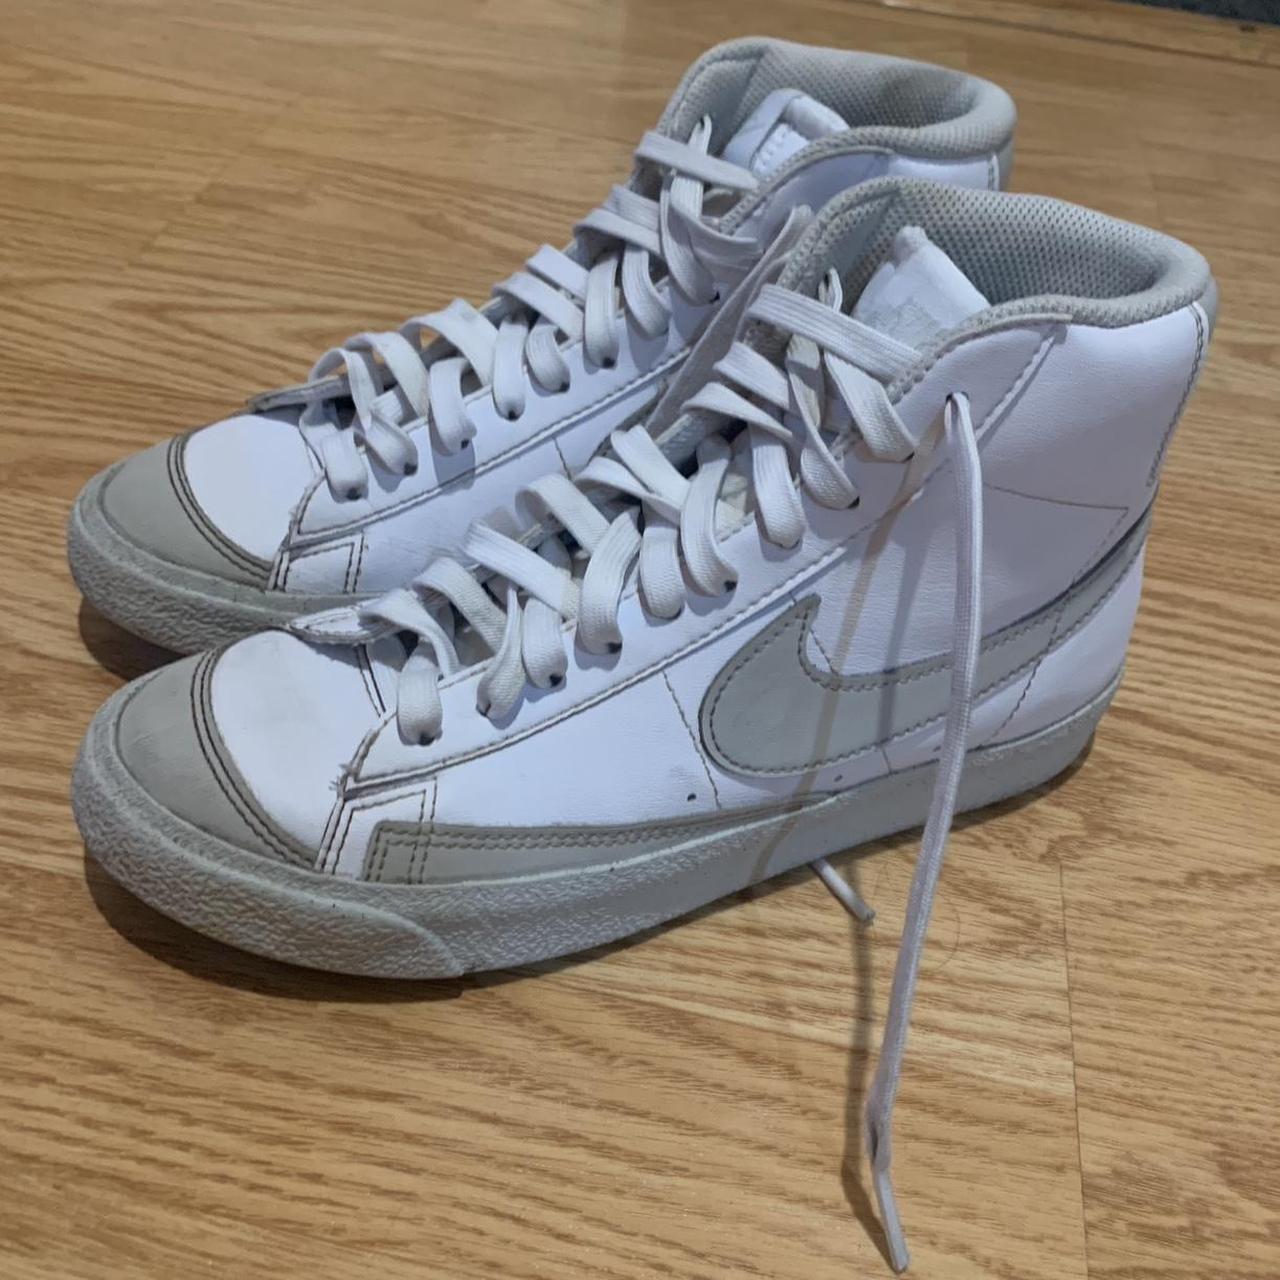 Nike Women's White and Grey Trainers